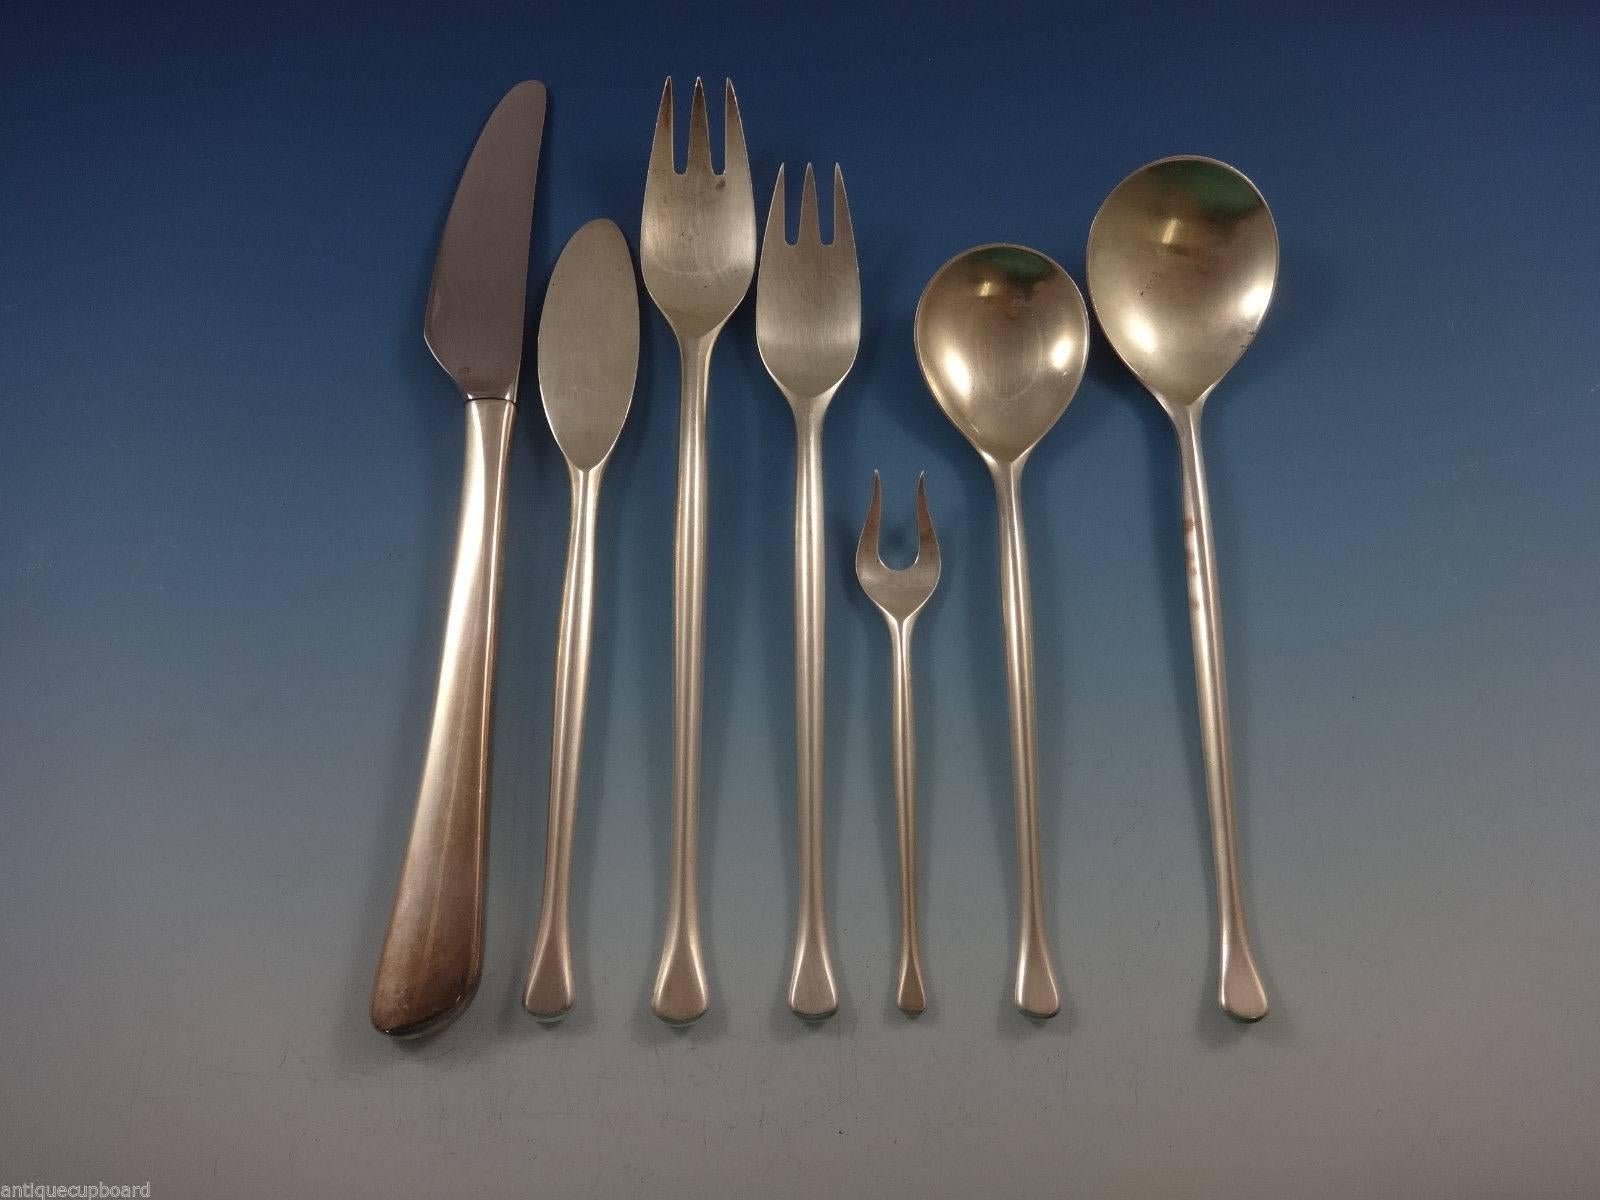 These magnificent, intricately handcrafted utensils show off the exceptional skill of the legendary Michelsen Copenhagen silversmiths. 

 
Rare saphir by A. Michelsen Danish-Moderne sterling flatware set of 60 pieces. This set includes:

Eight